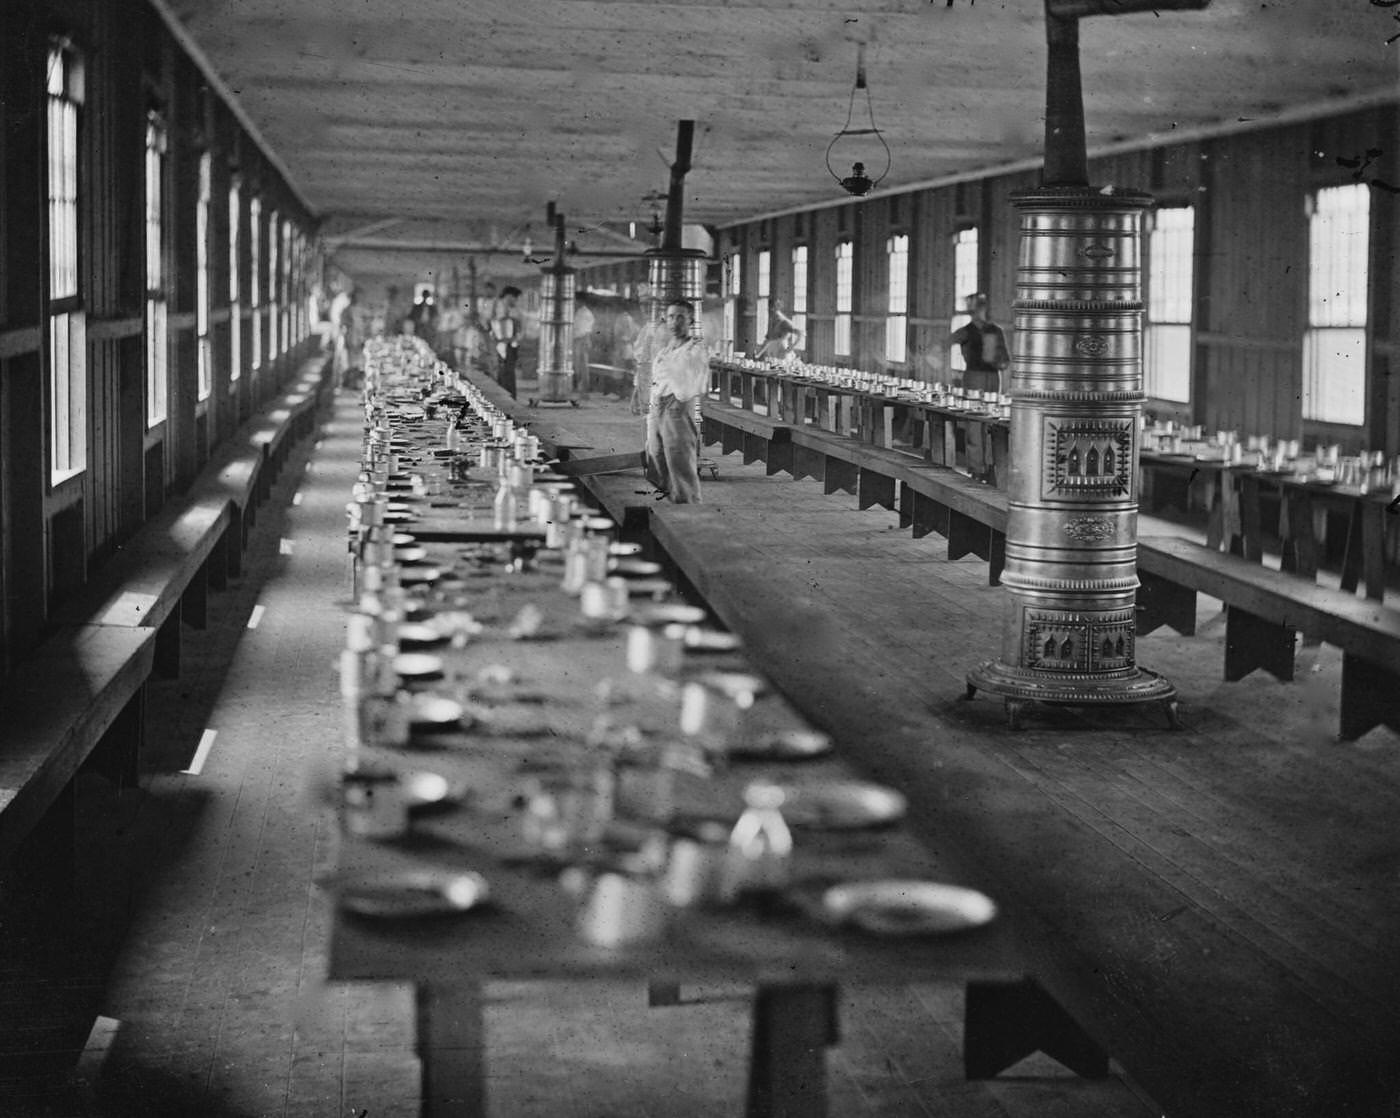 Interior view showing the mess hall at Harewood Hospital, heated by elaborate stoves, Washington, D.C., 1865